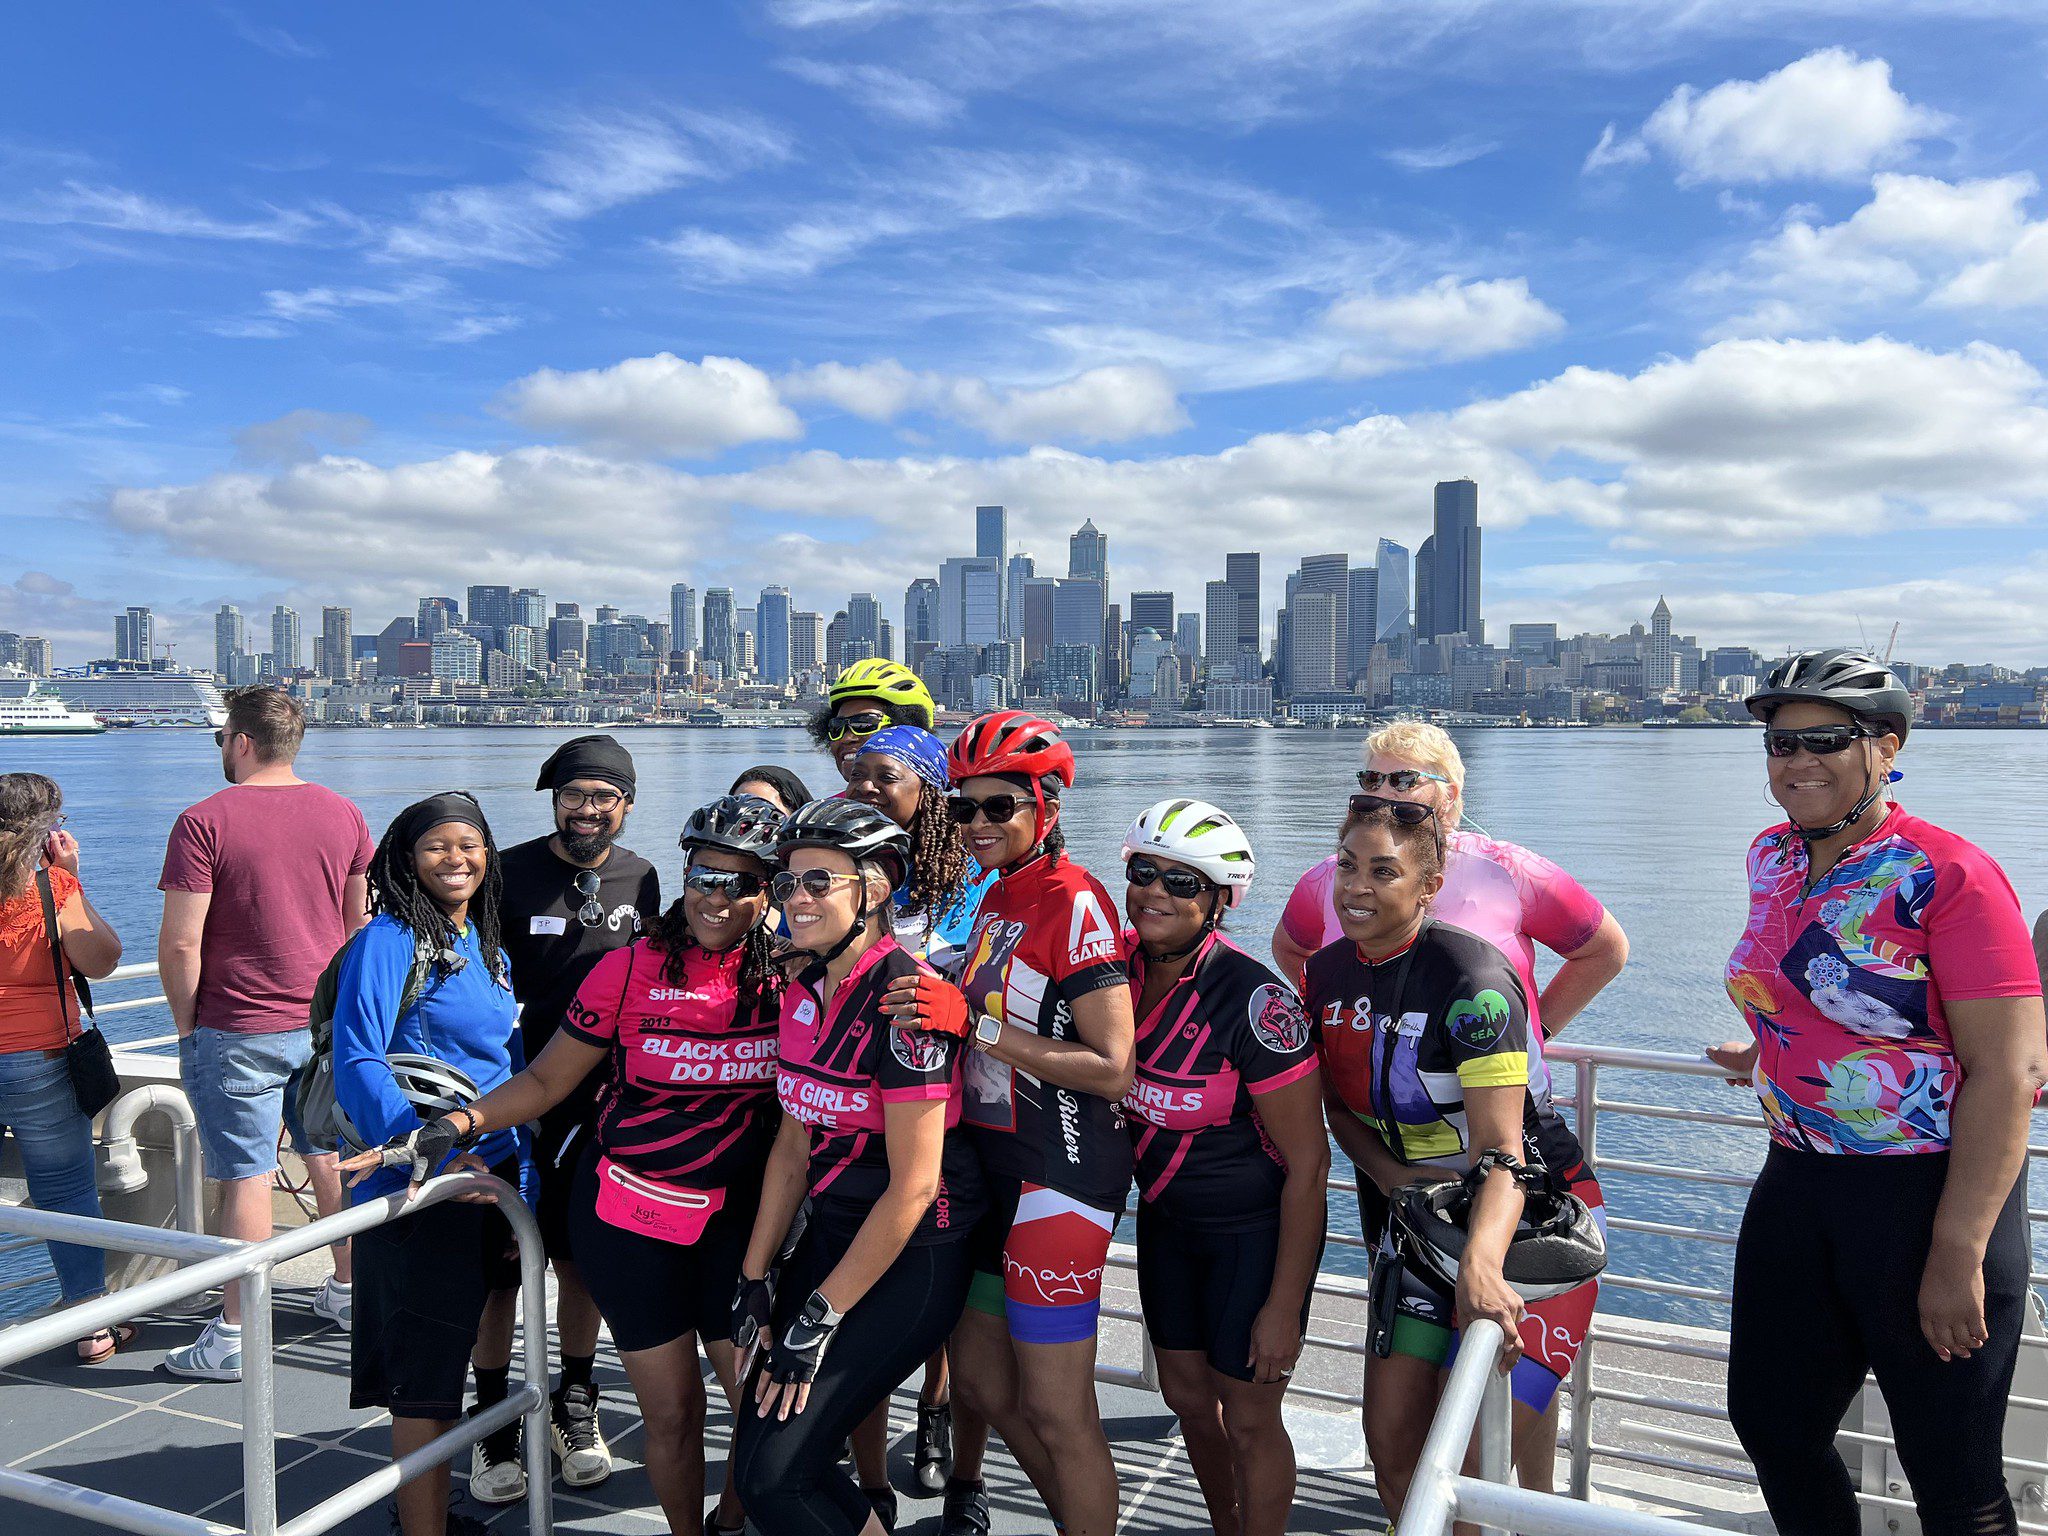 Several Black women and community members smile while riding on a boat with a cityscape in the background on a sunny day. Most people are wearing bike gear and several people are wearing bike helmets.